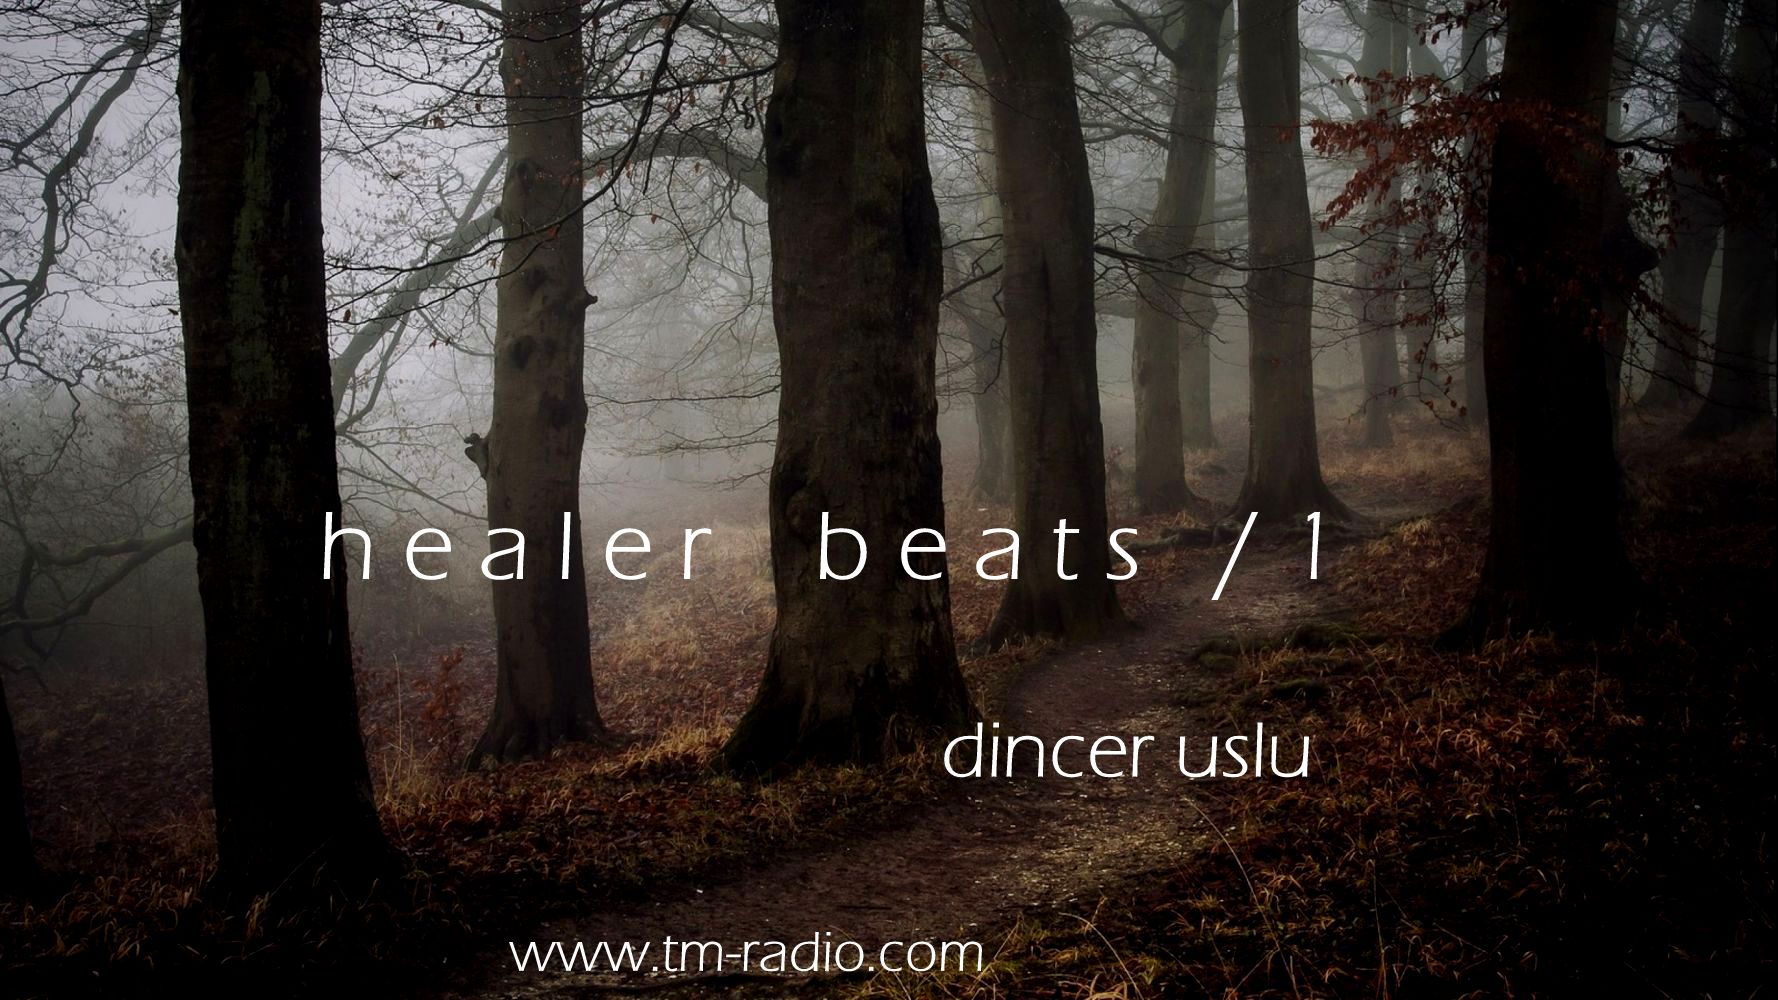 HEALER BEATS :: Grand Opening on TM Radio (aired on April 11th, 2020) banner logo